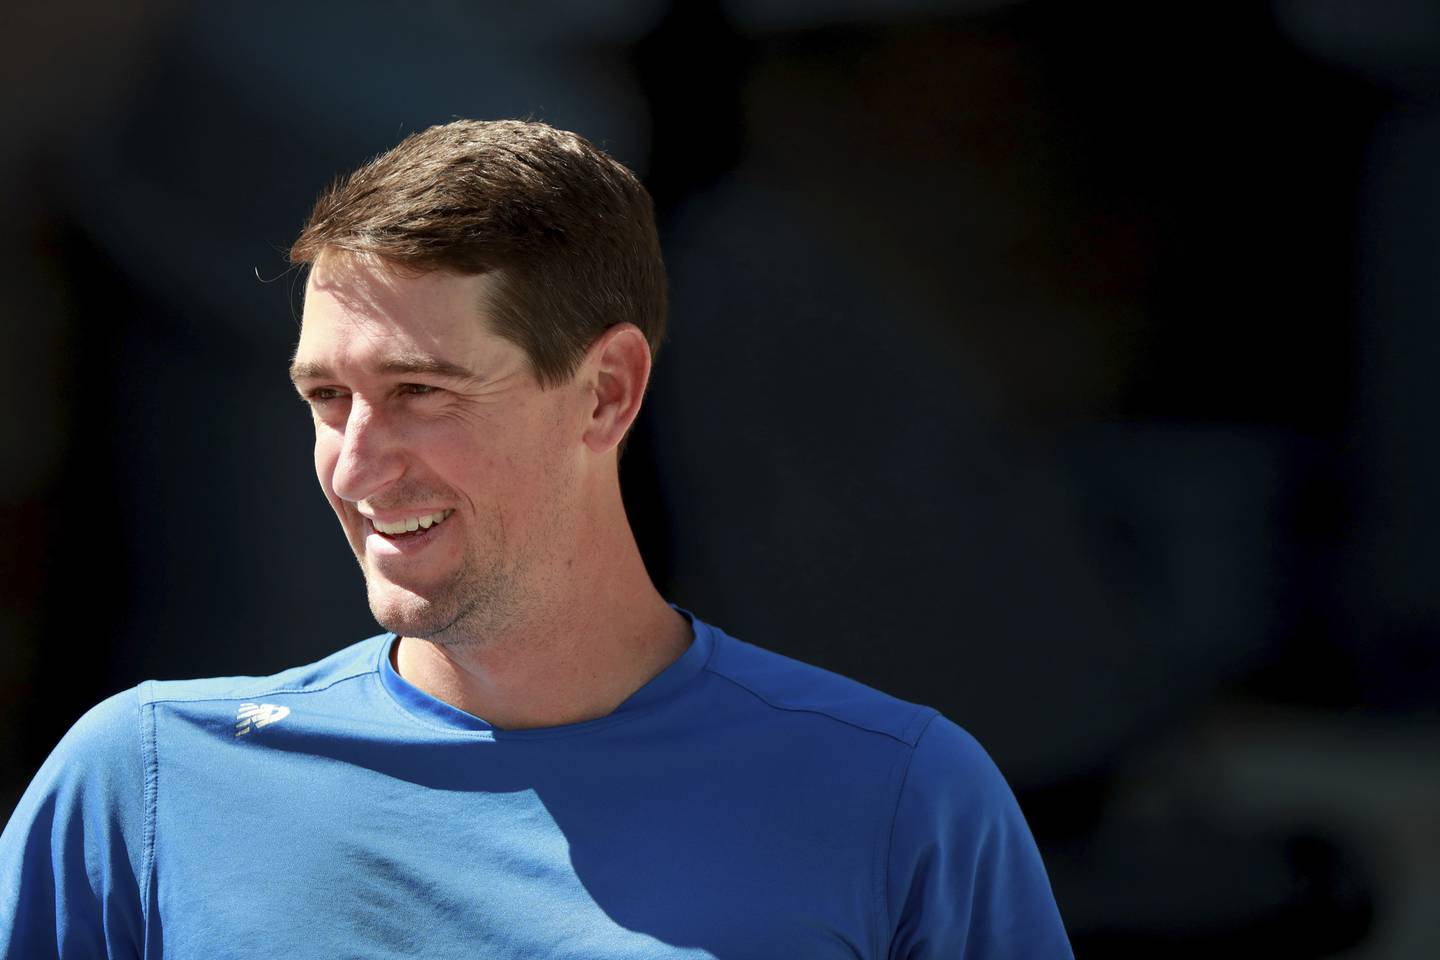 Cubs pitcher Kyle Hendricks has a laugh during spring training at Sloan Park in Mesa, Ariz., on March 16, 2022.